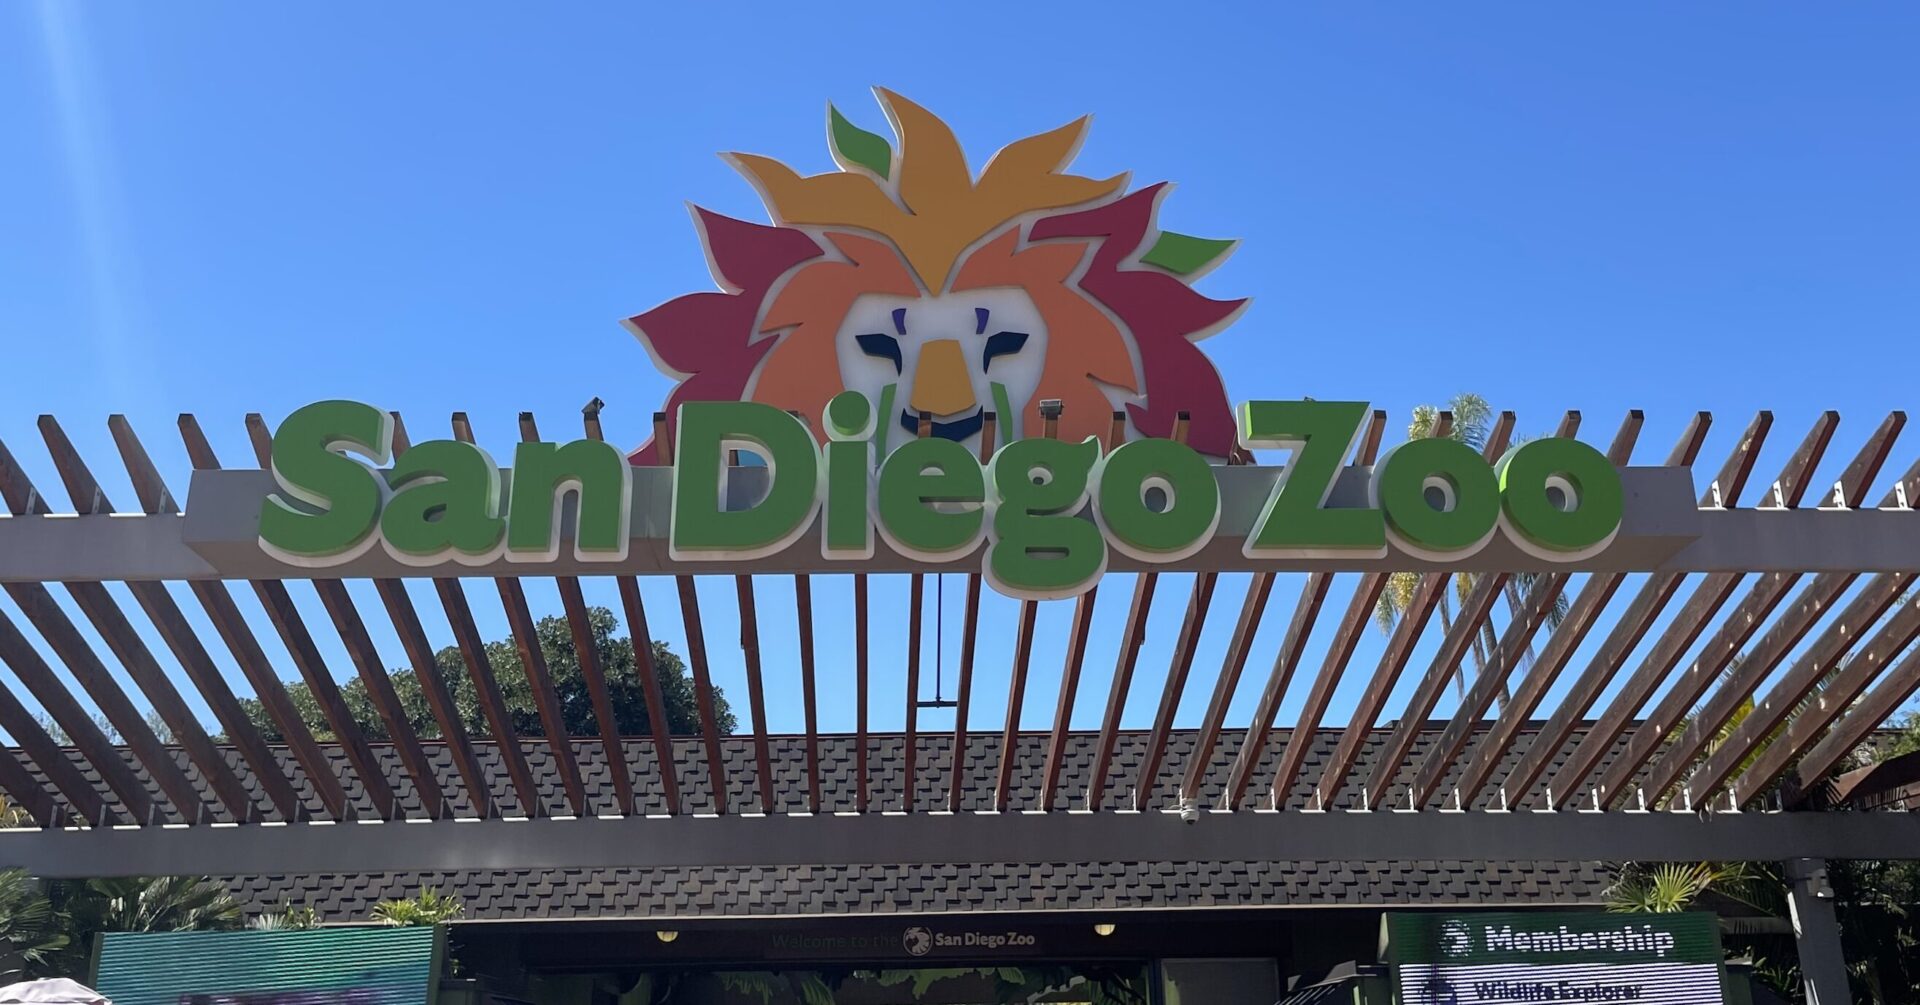 San Diego Zoo sign at the entrance of the zoo